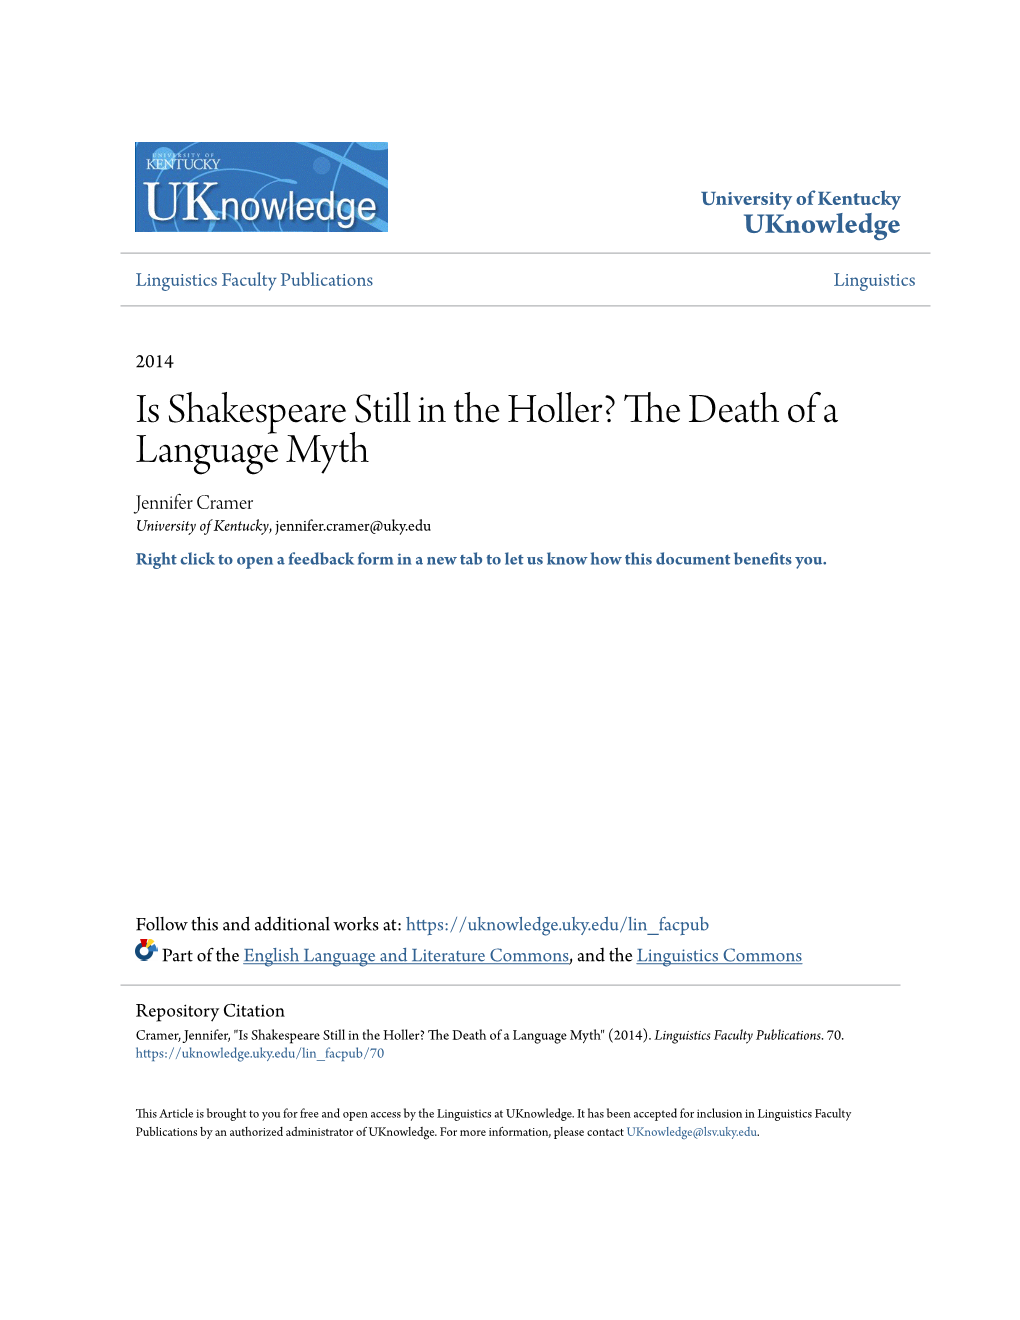 Is Shakespeare Still in the Holler? the Death of a Language Myth